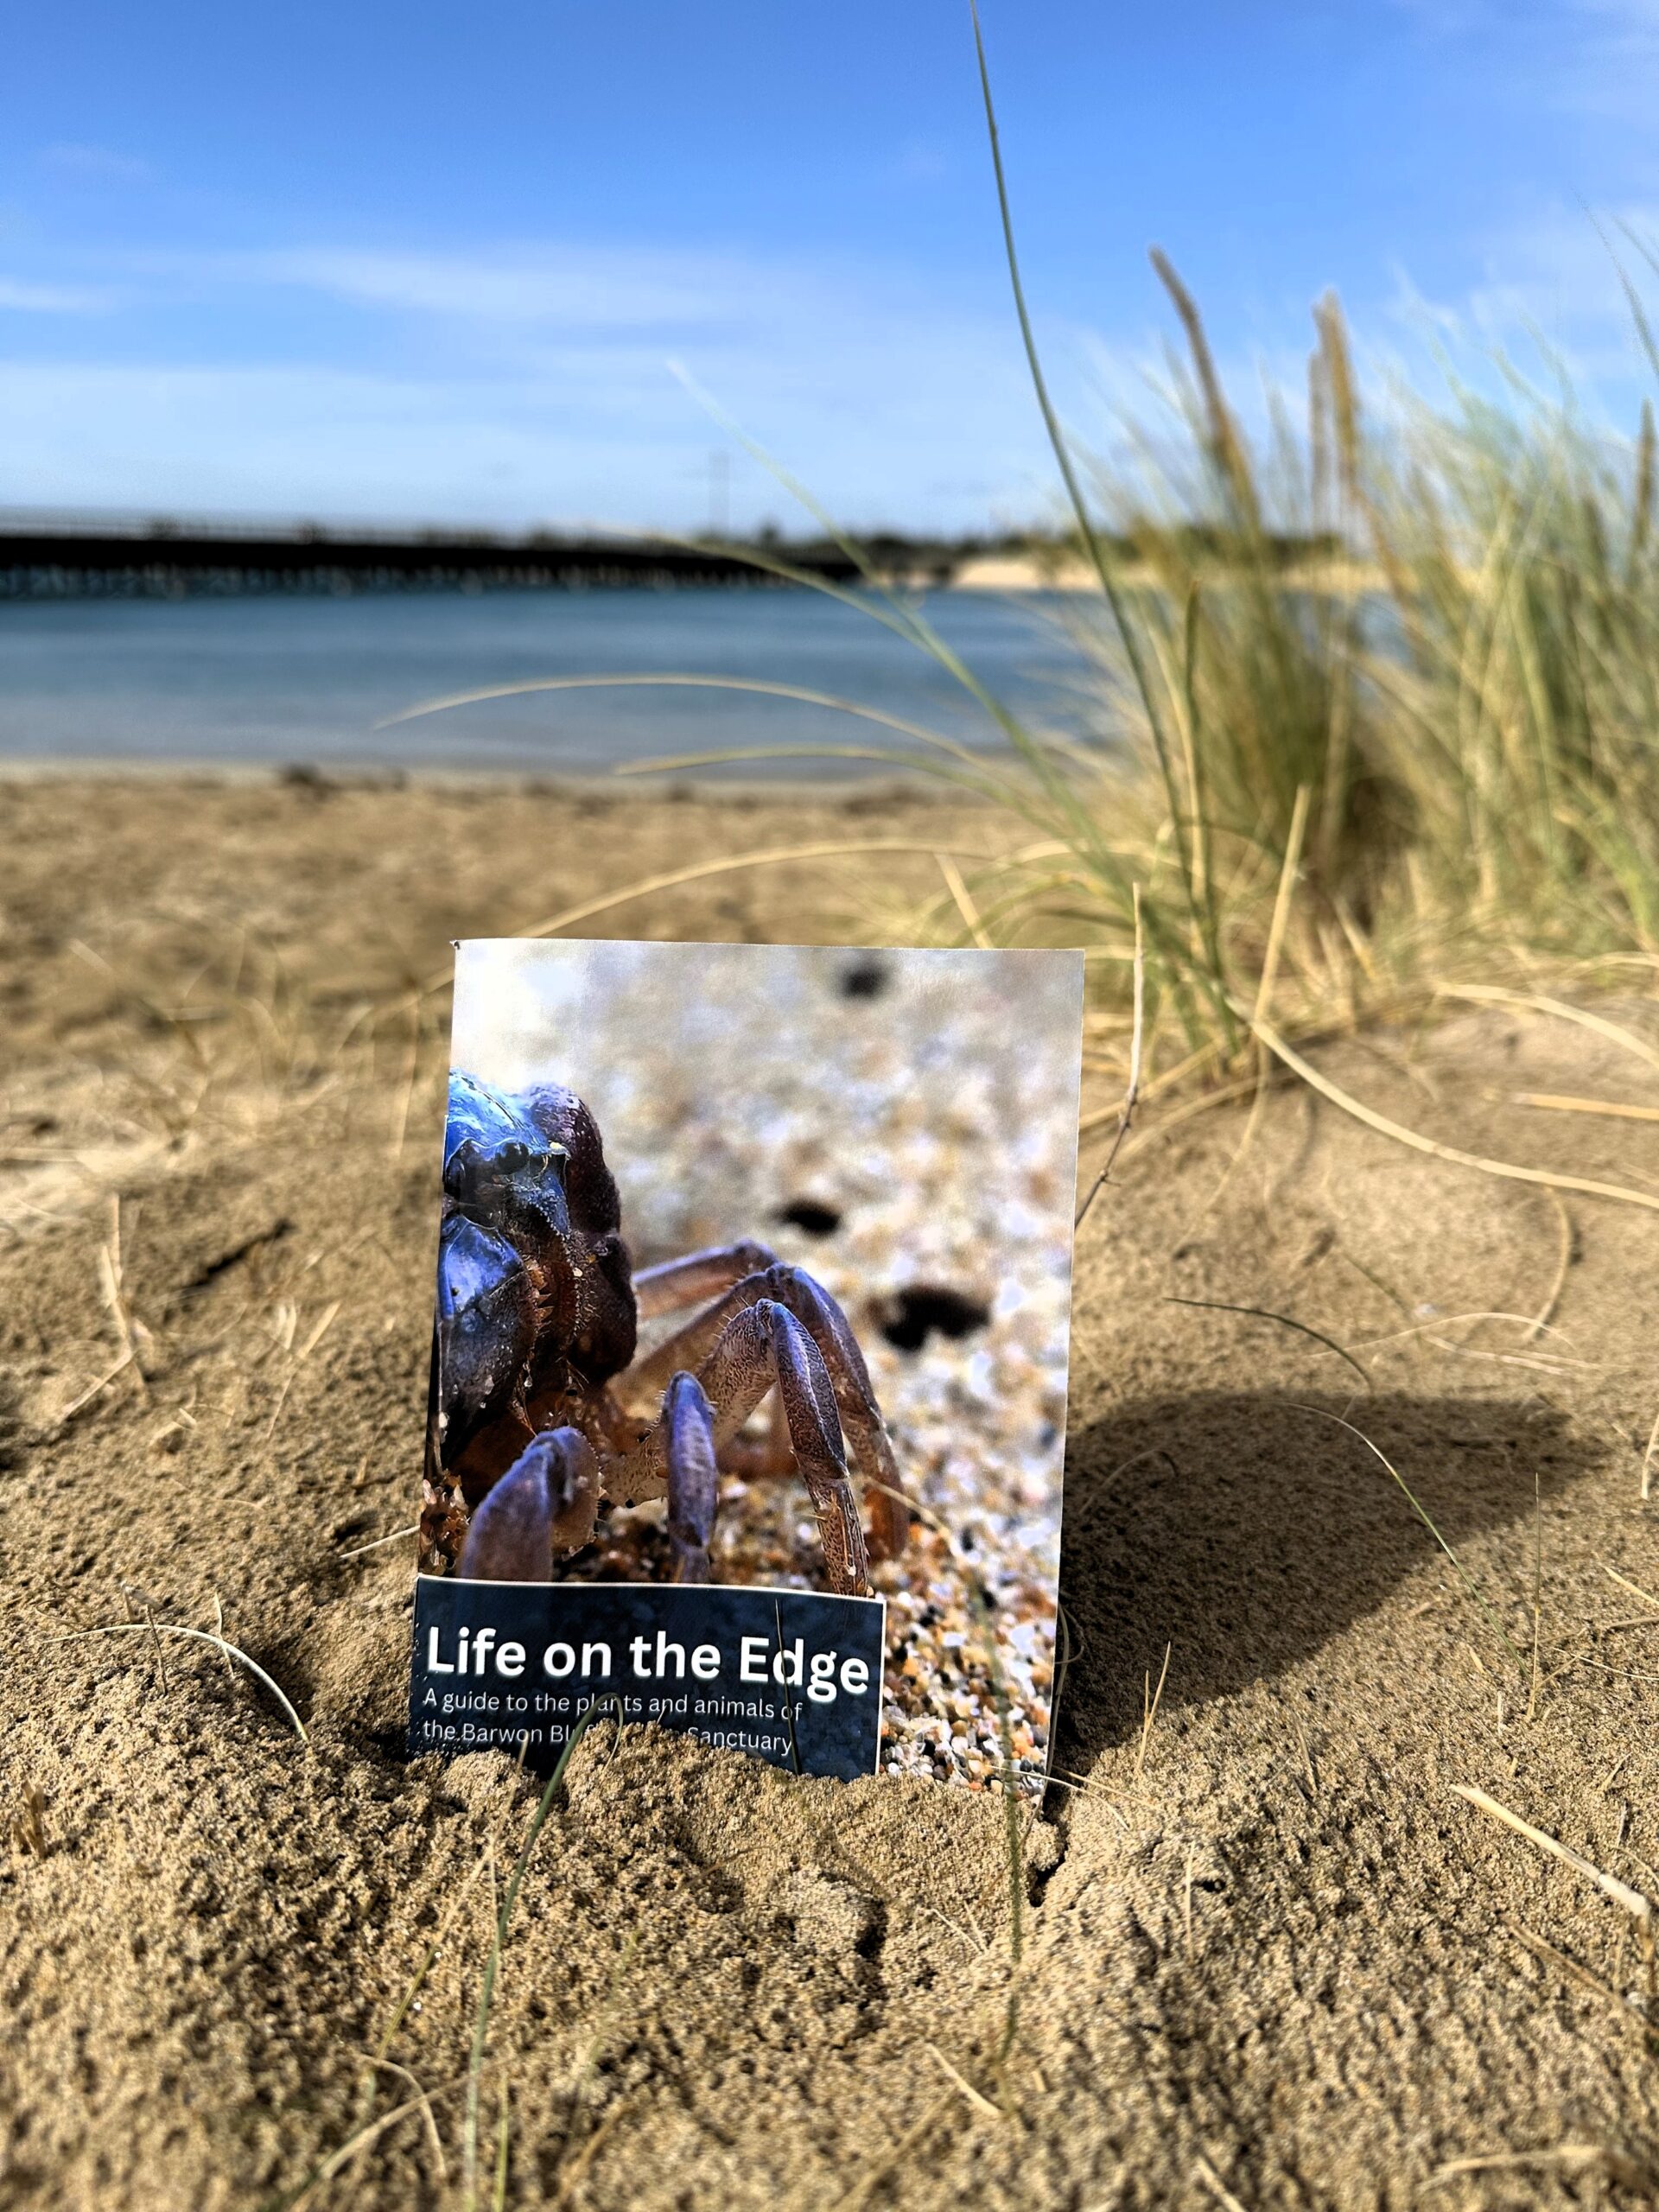 Image of the "Life on the Edge" booklet sitting in the sand on the Barwon River